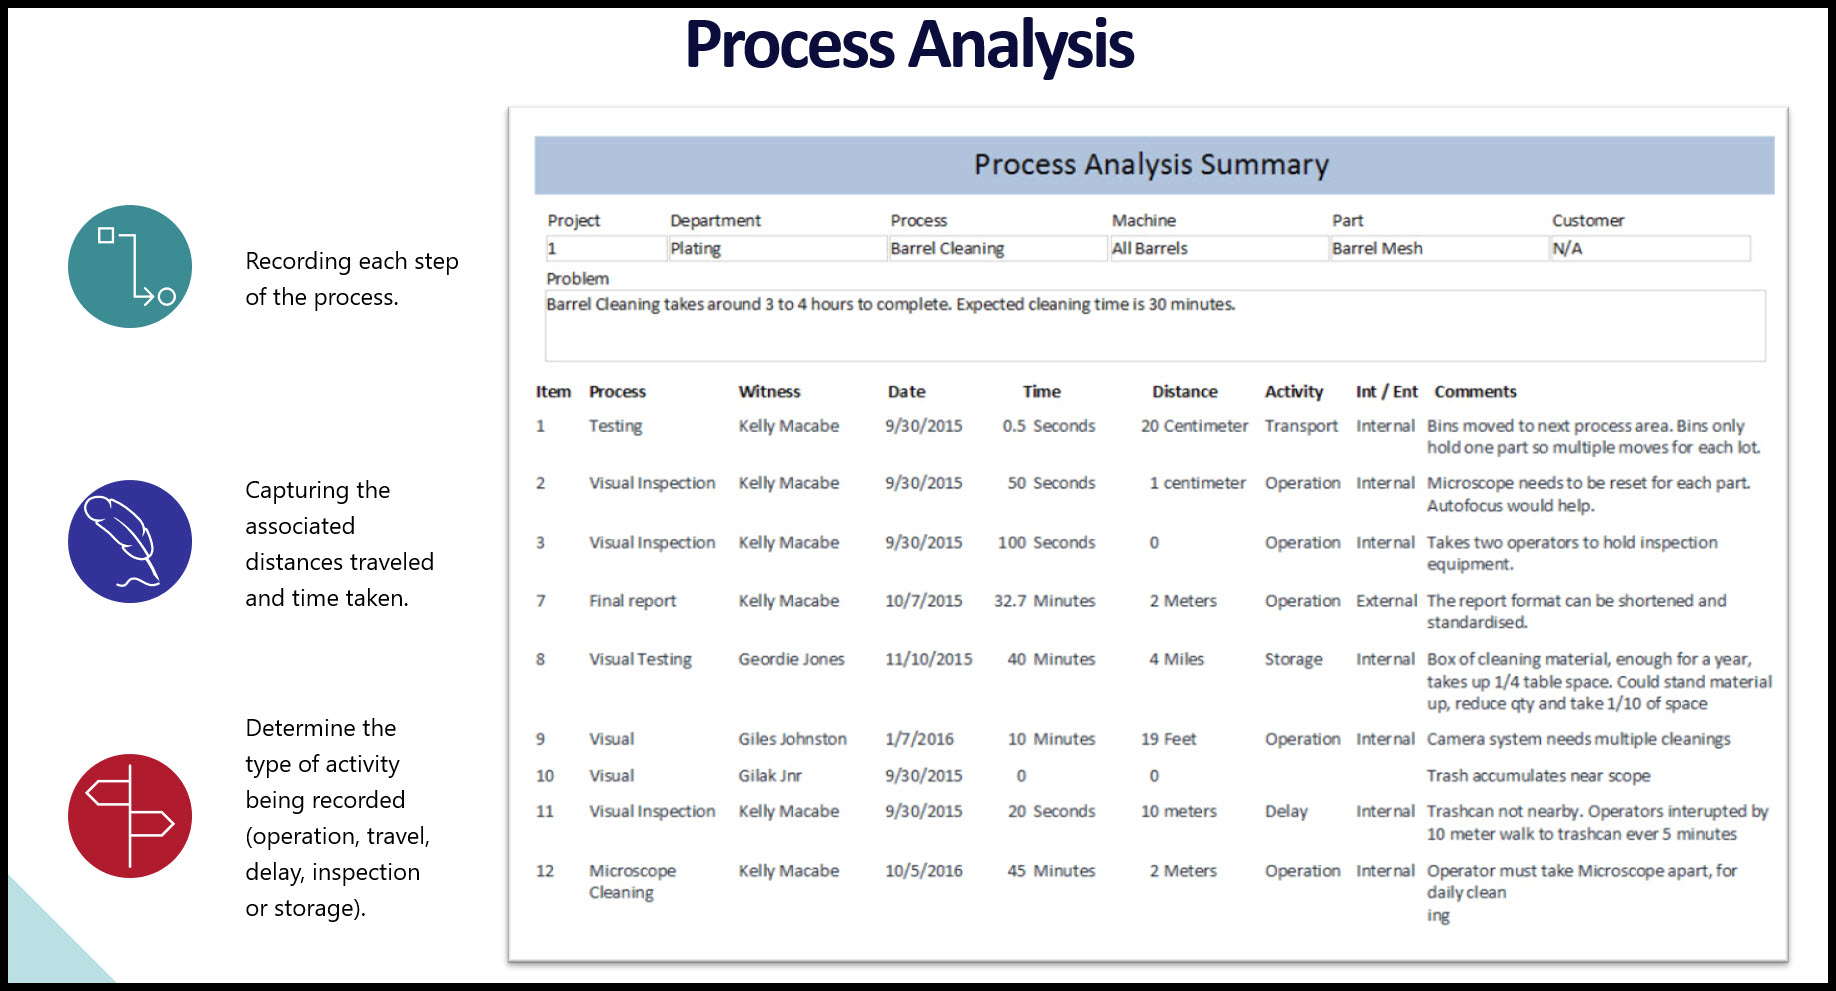 Examine the key elements of interaction process analysis flow which is a key process improvement method. This significantly supports lean implementation.